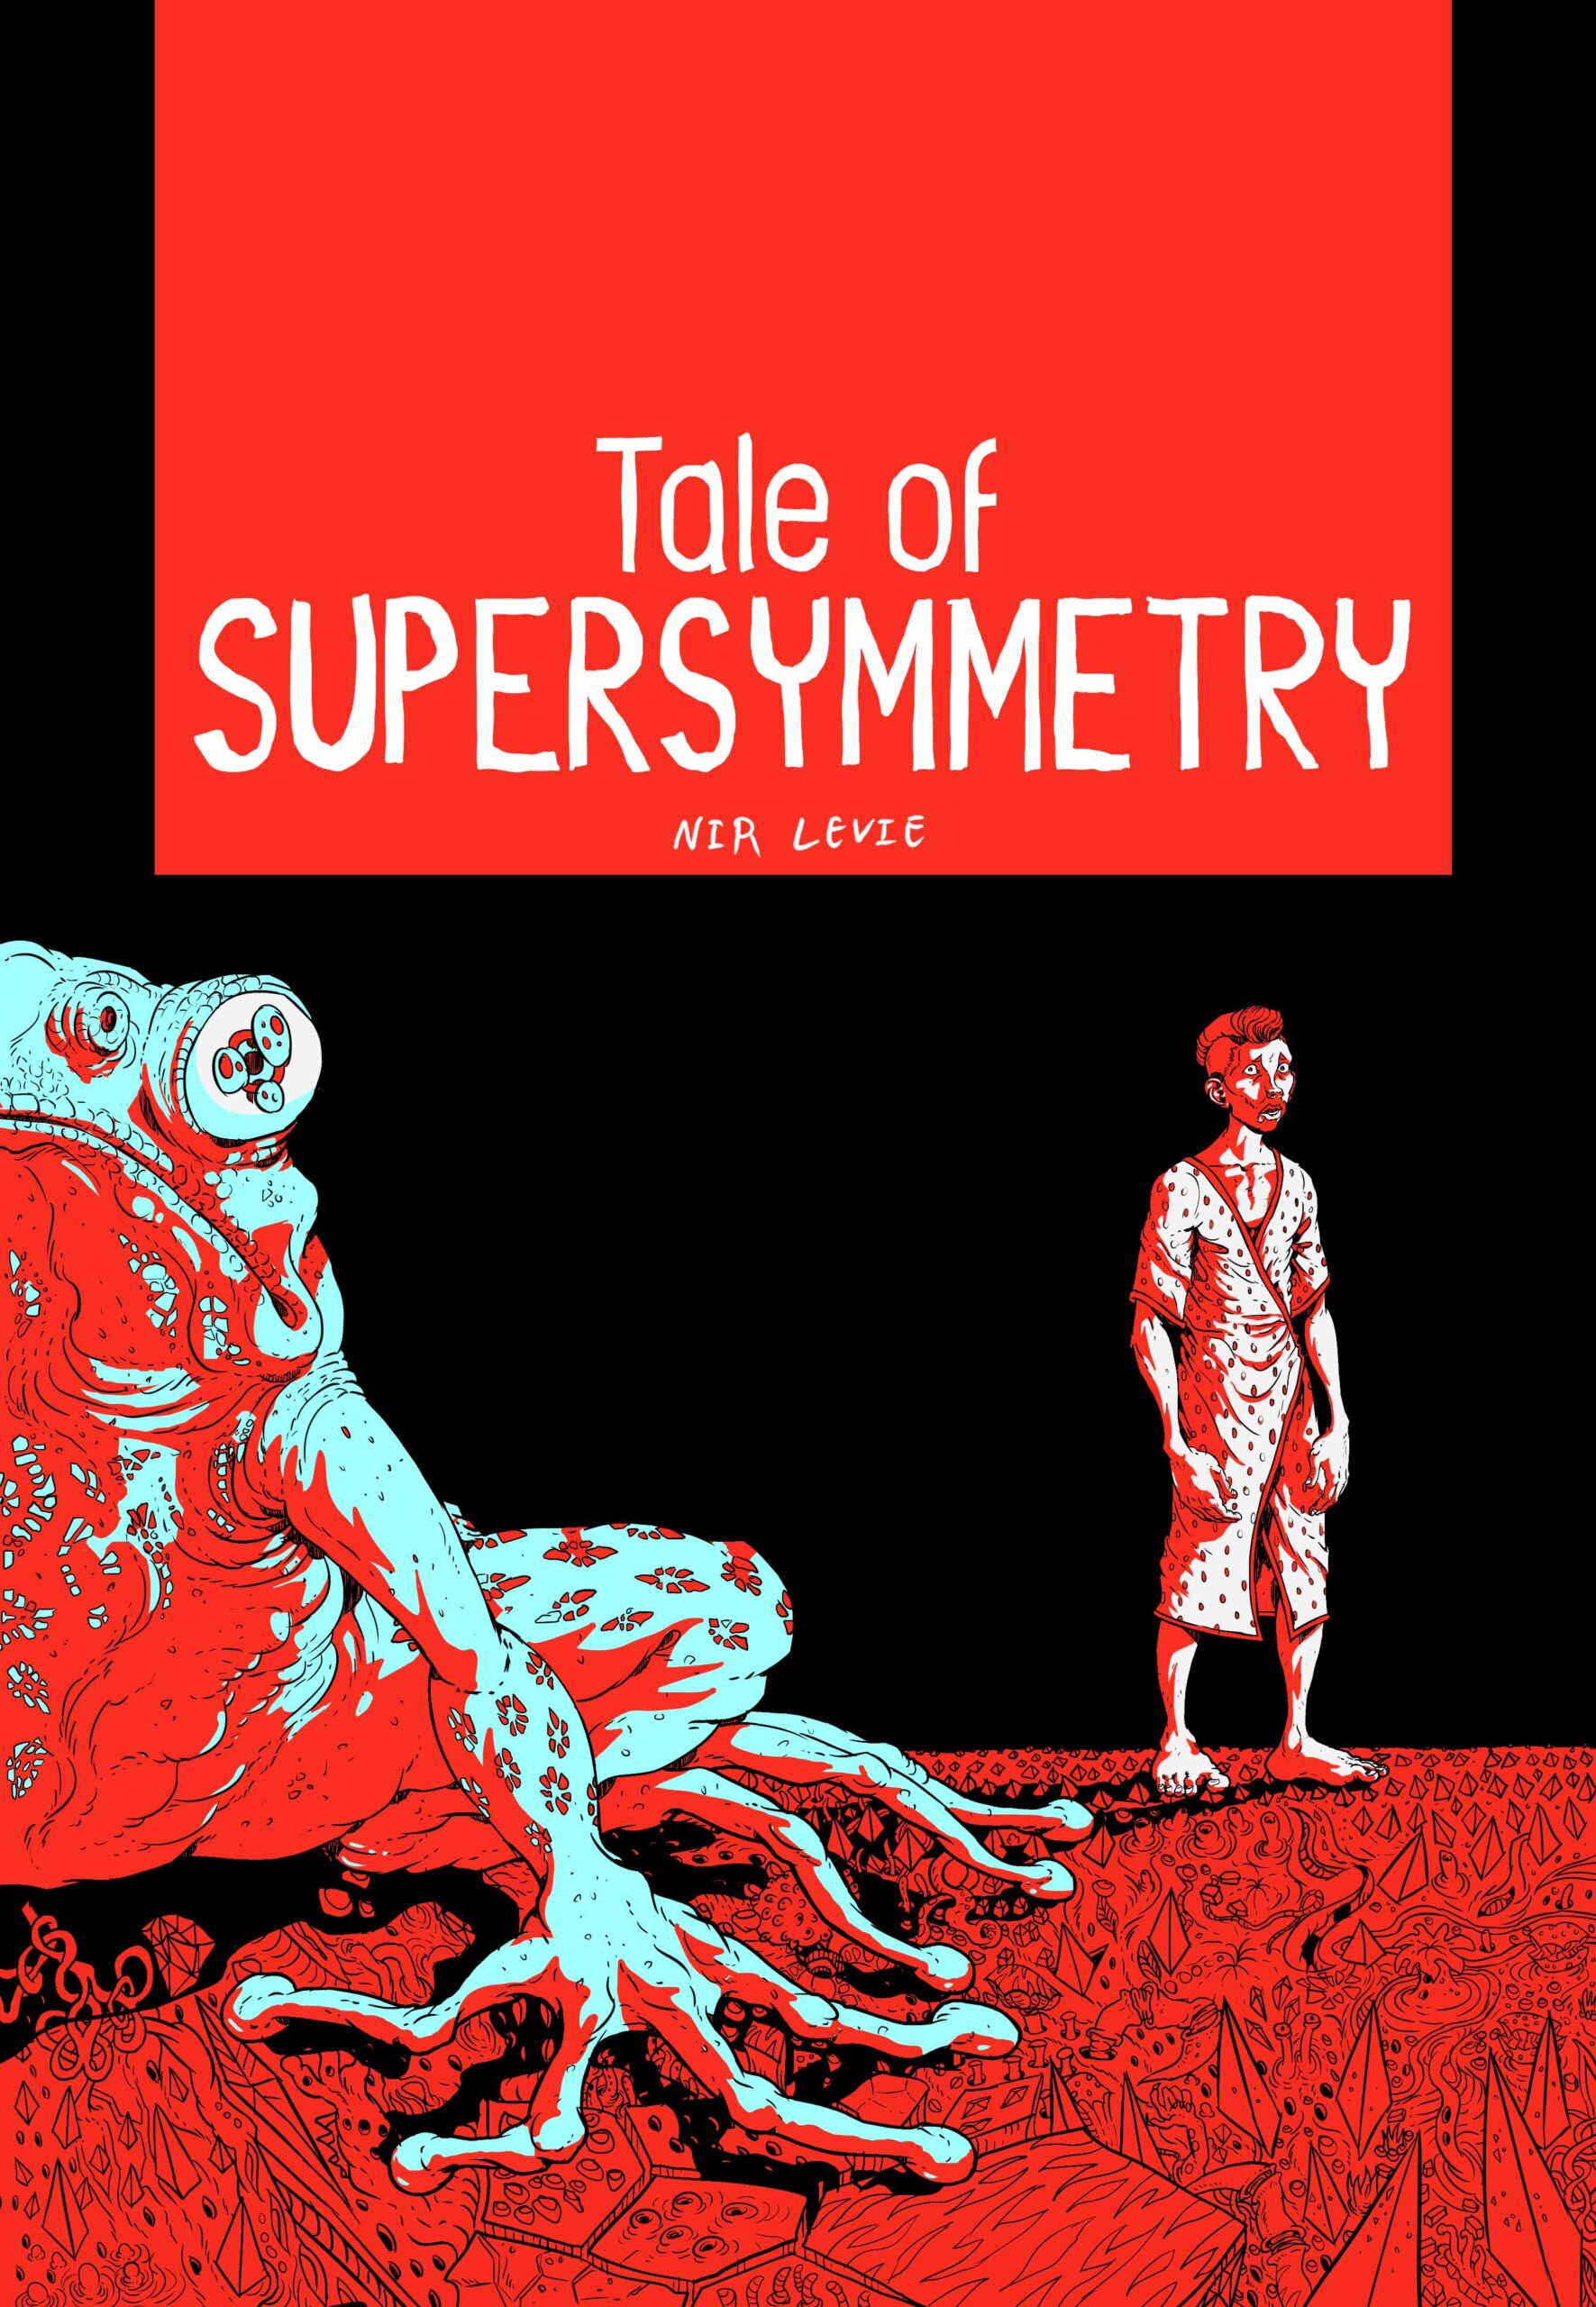 A Tale of Supersymmetry by Nir Levie